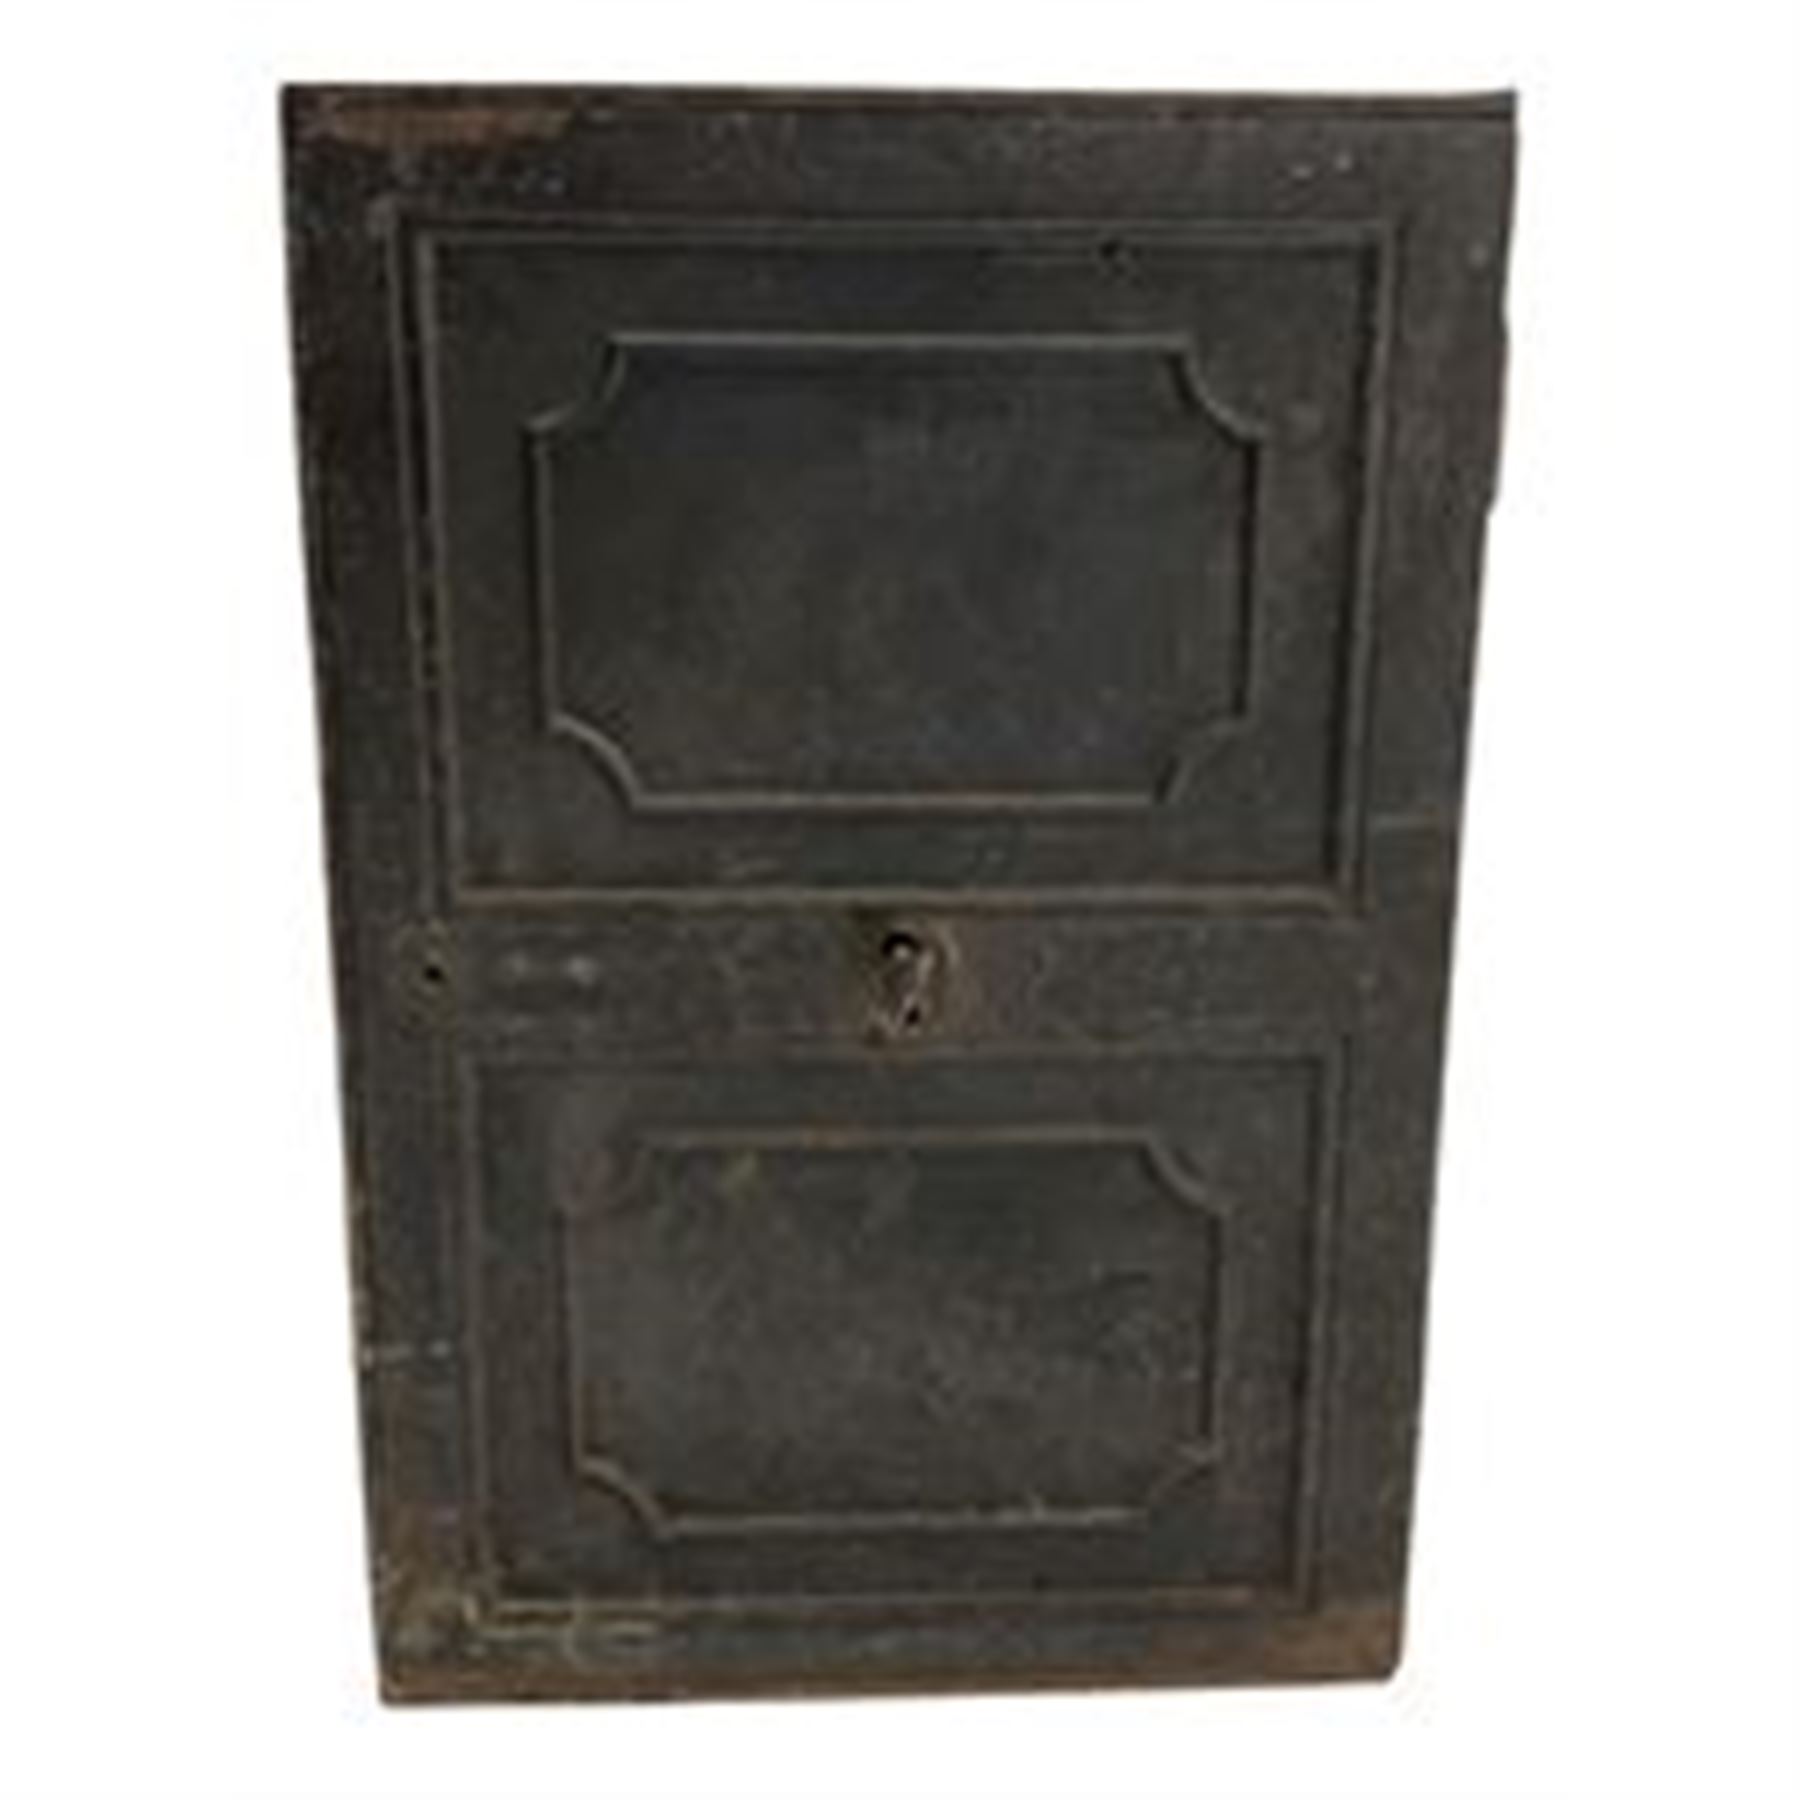 Early 19th century cast iron safe or strong box - Image 3 of 5